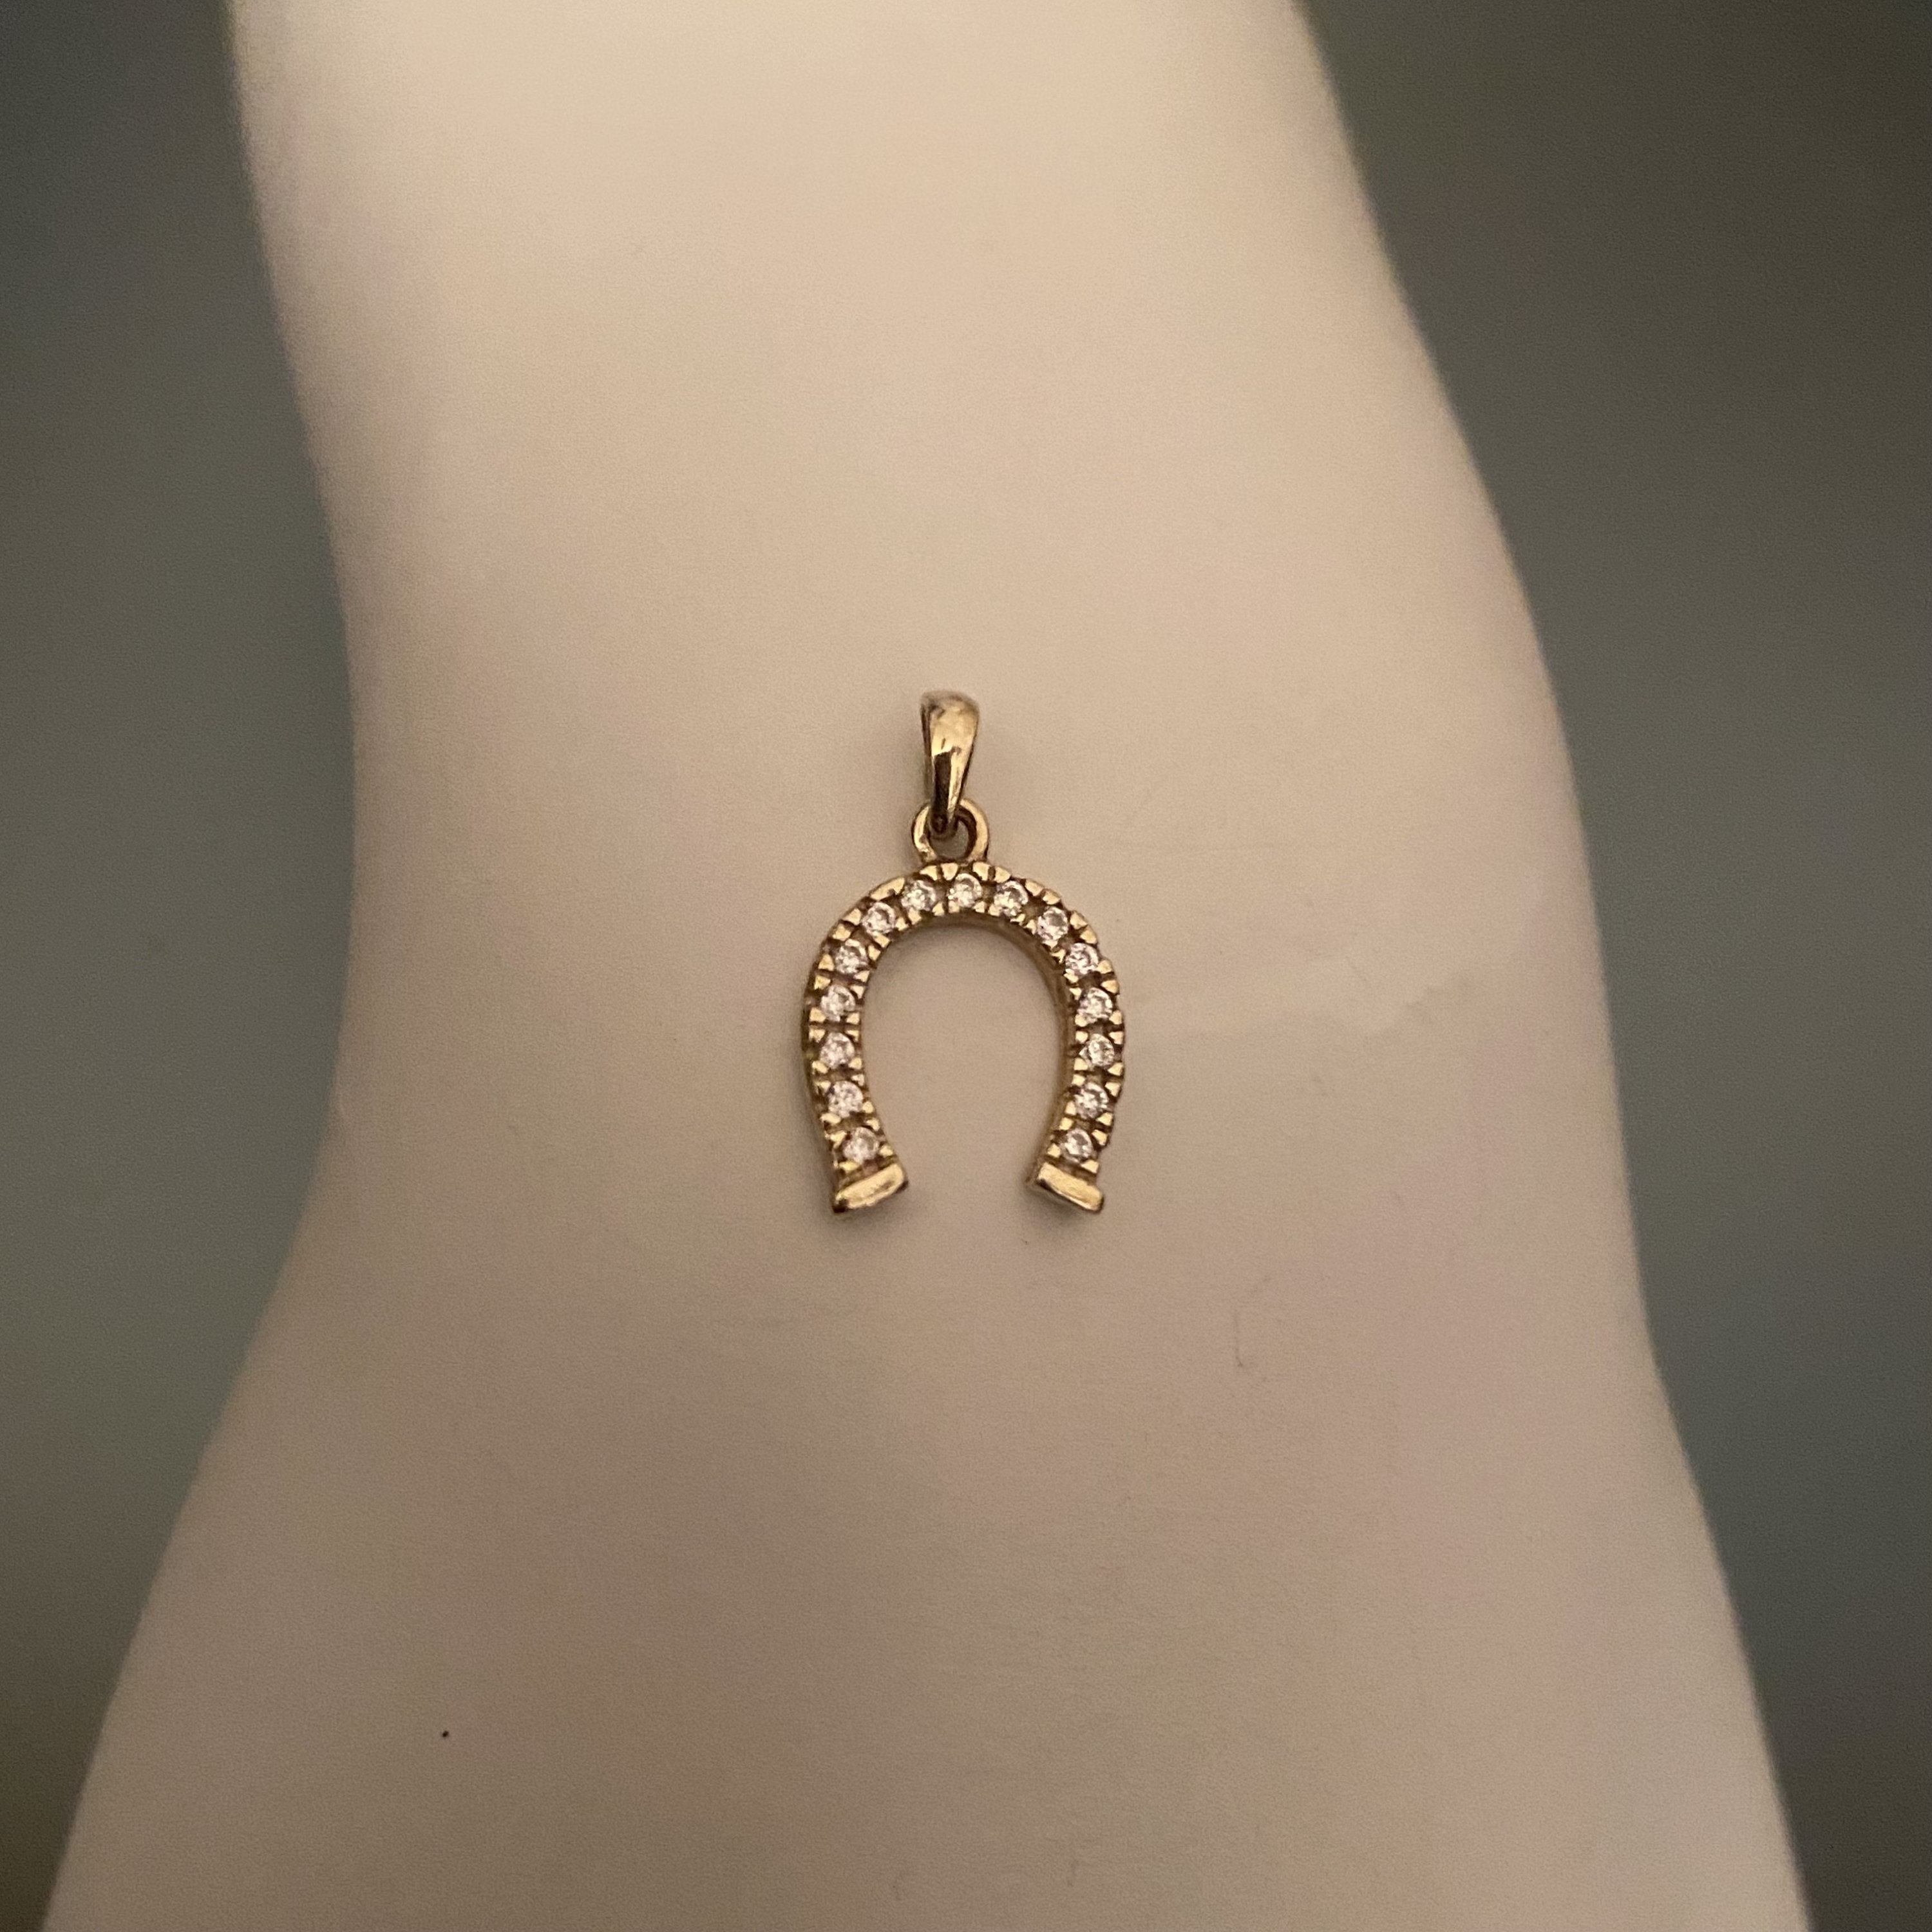 10pc horseshoe charm gold, good luck charms, lucky charms, horse shoe,  bracelet charms, matte gold metal beads, necklace charms, gold dangle